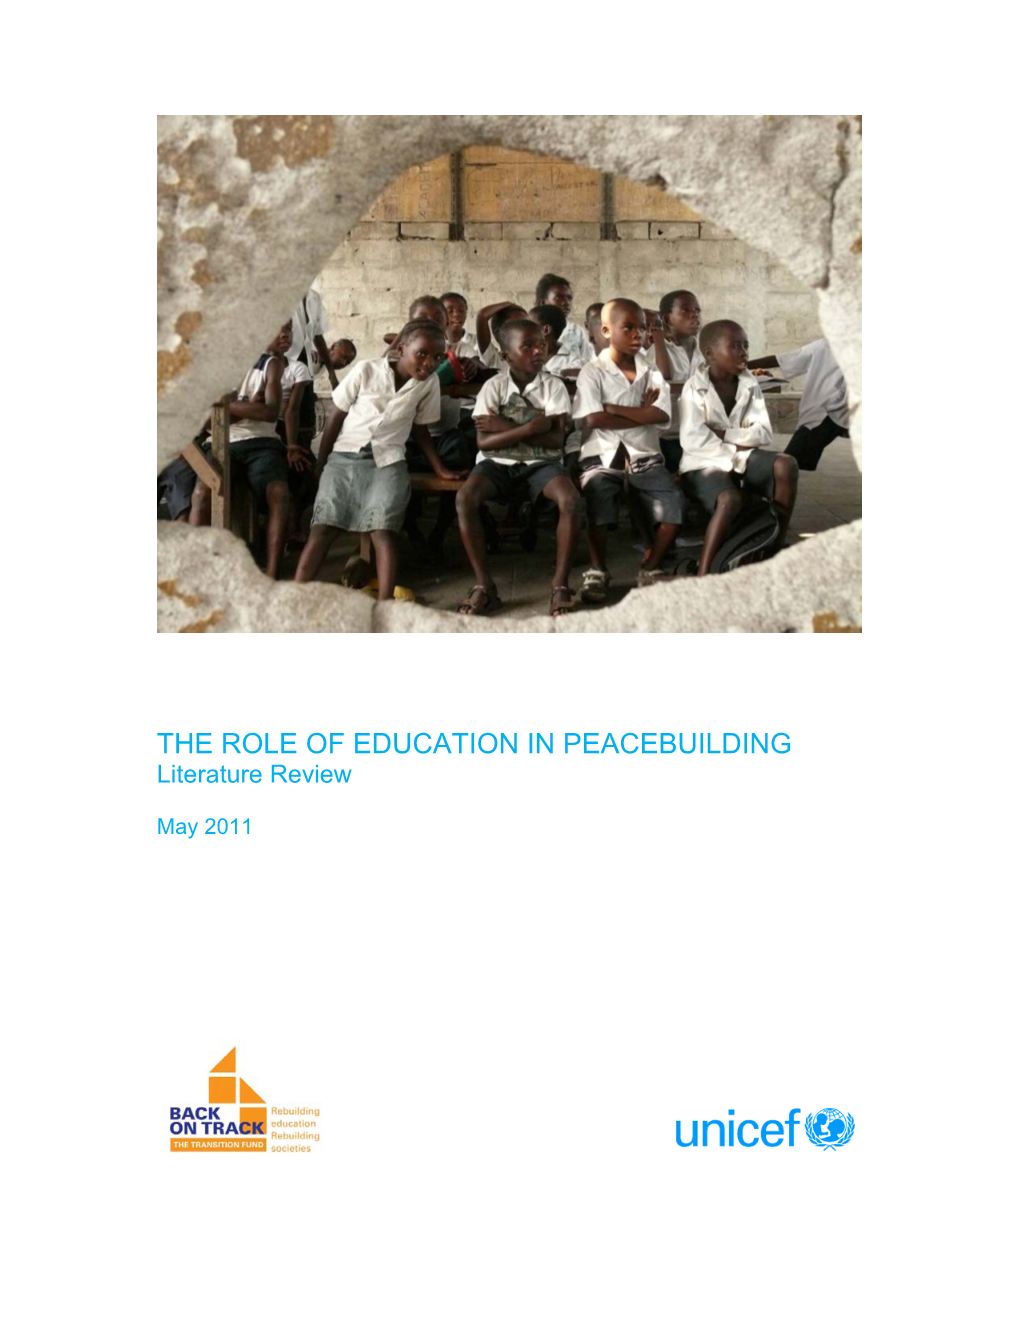 The Role of Education in Peacebuilding: Literature Review